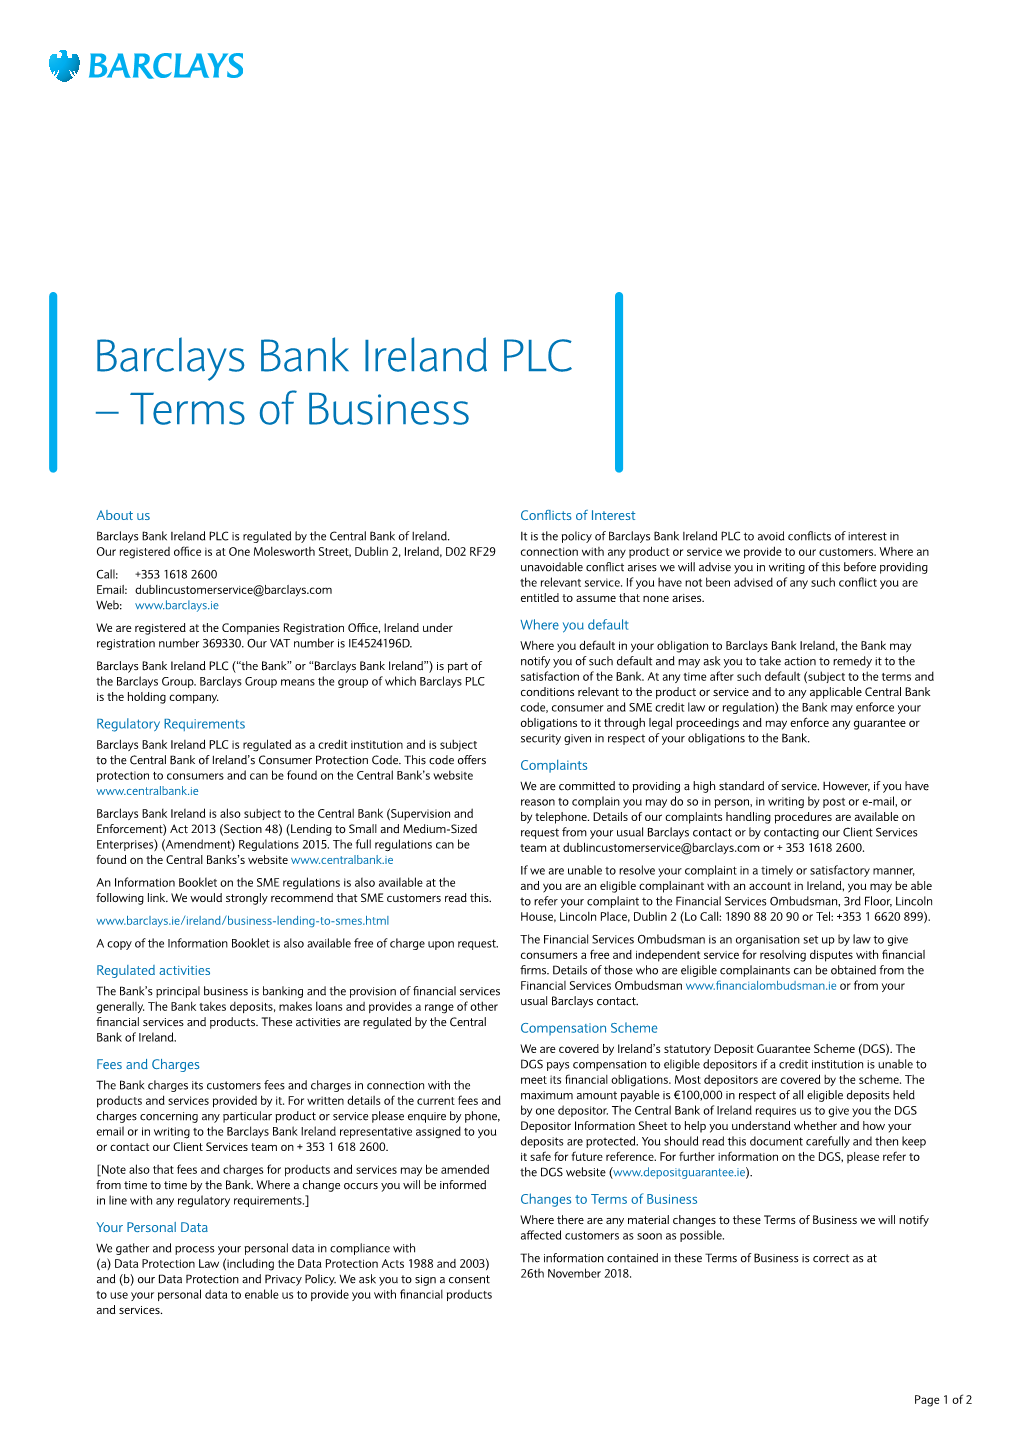 Barclays Bank Ireland PLC – Terms of Business